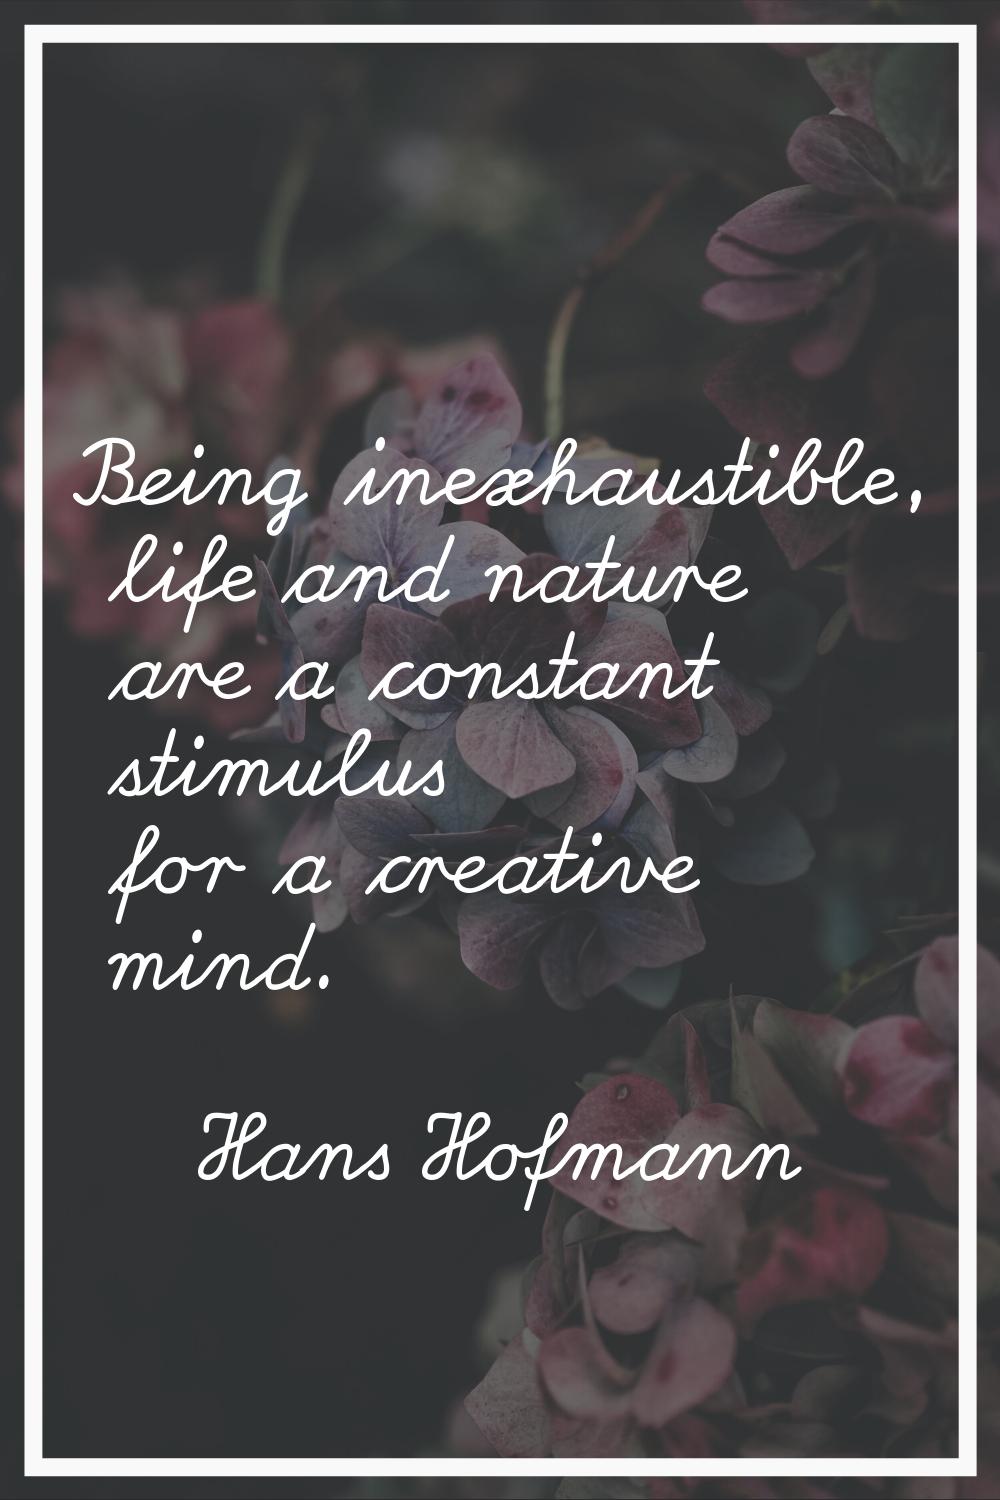 Being inexhaustible, life and nature are a constant stimulus for a creative mind.